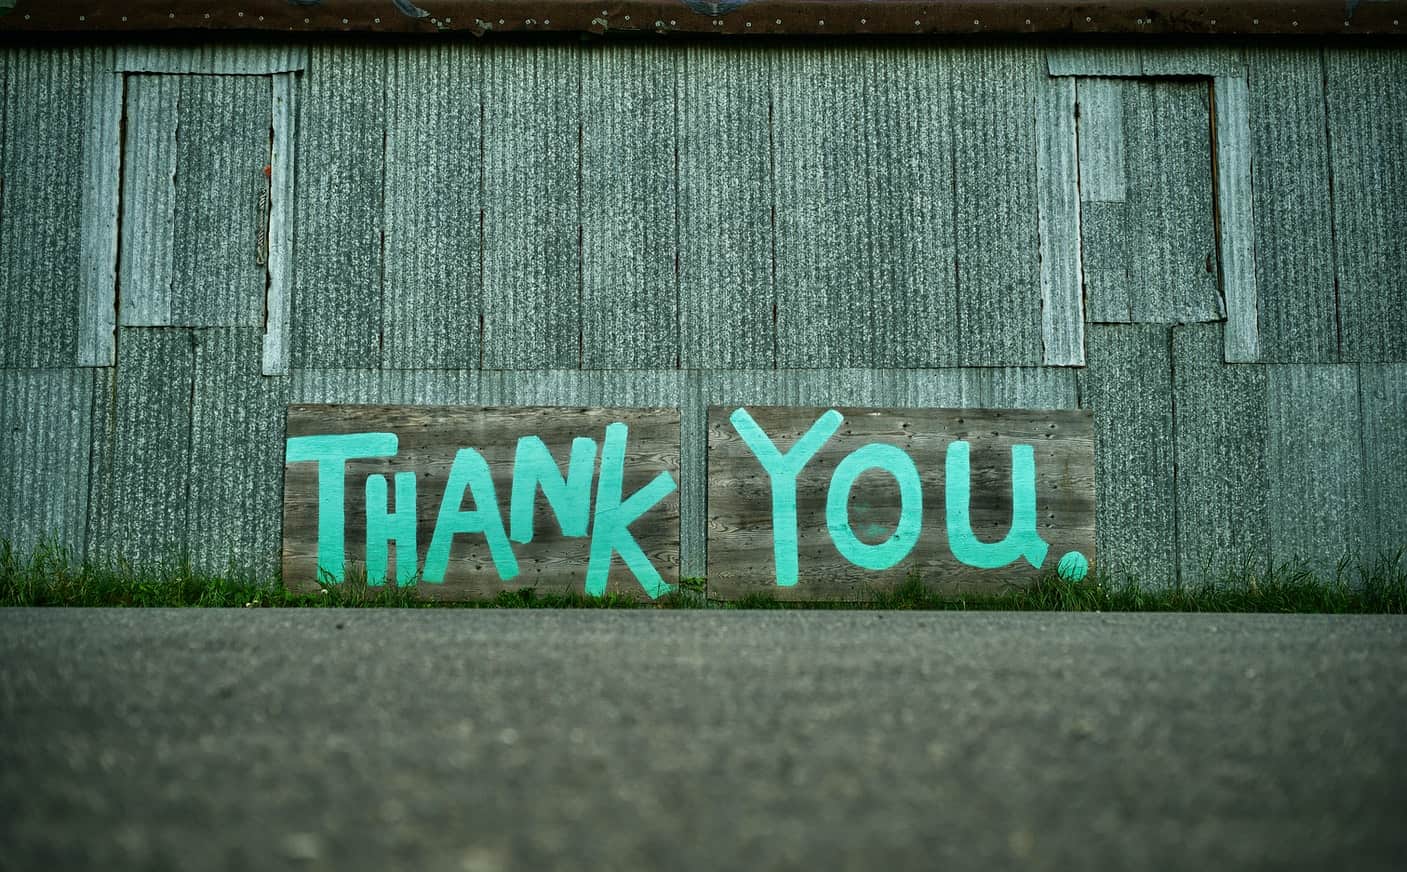 What has made you say “Thank you”, recently?